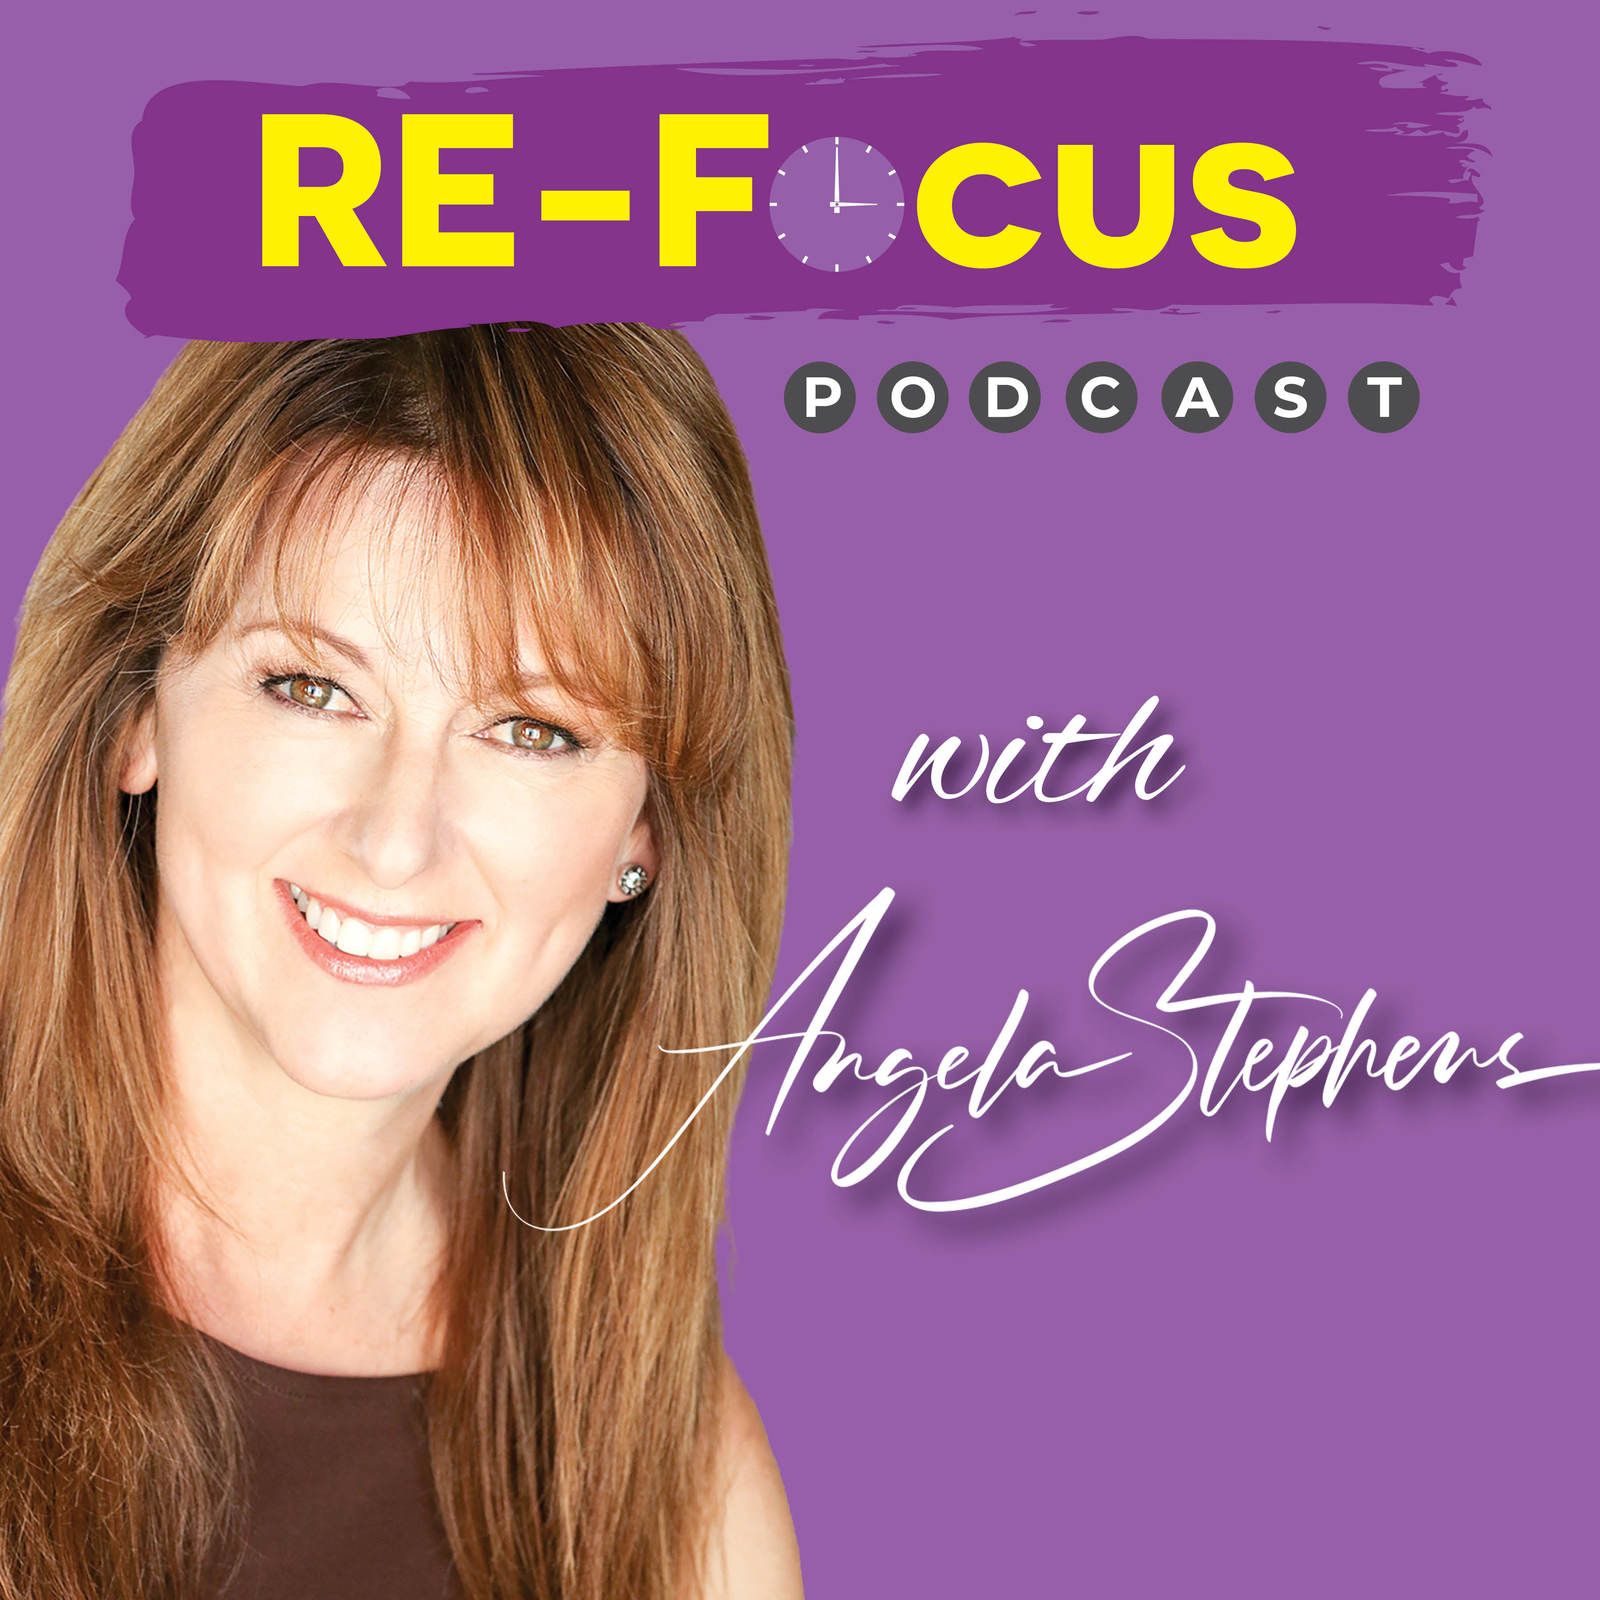 RE-Focus: The ADHD Podcast with Angela Stephens / ADHD Executive Business  Coach Robert Pal Shares How to Focus, Avoid Procrastination